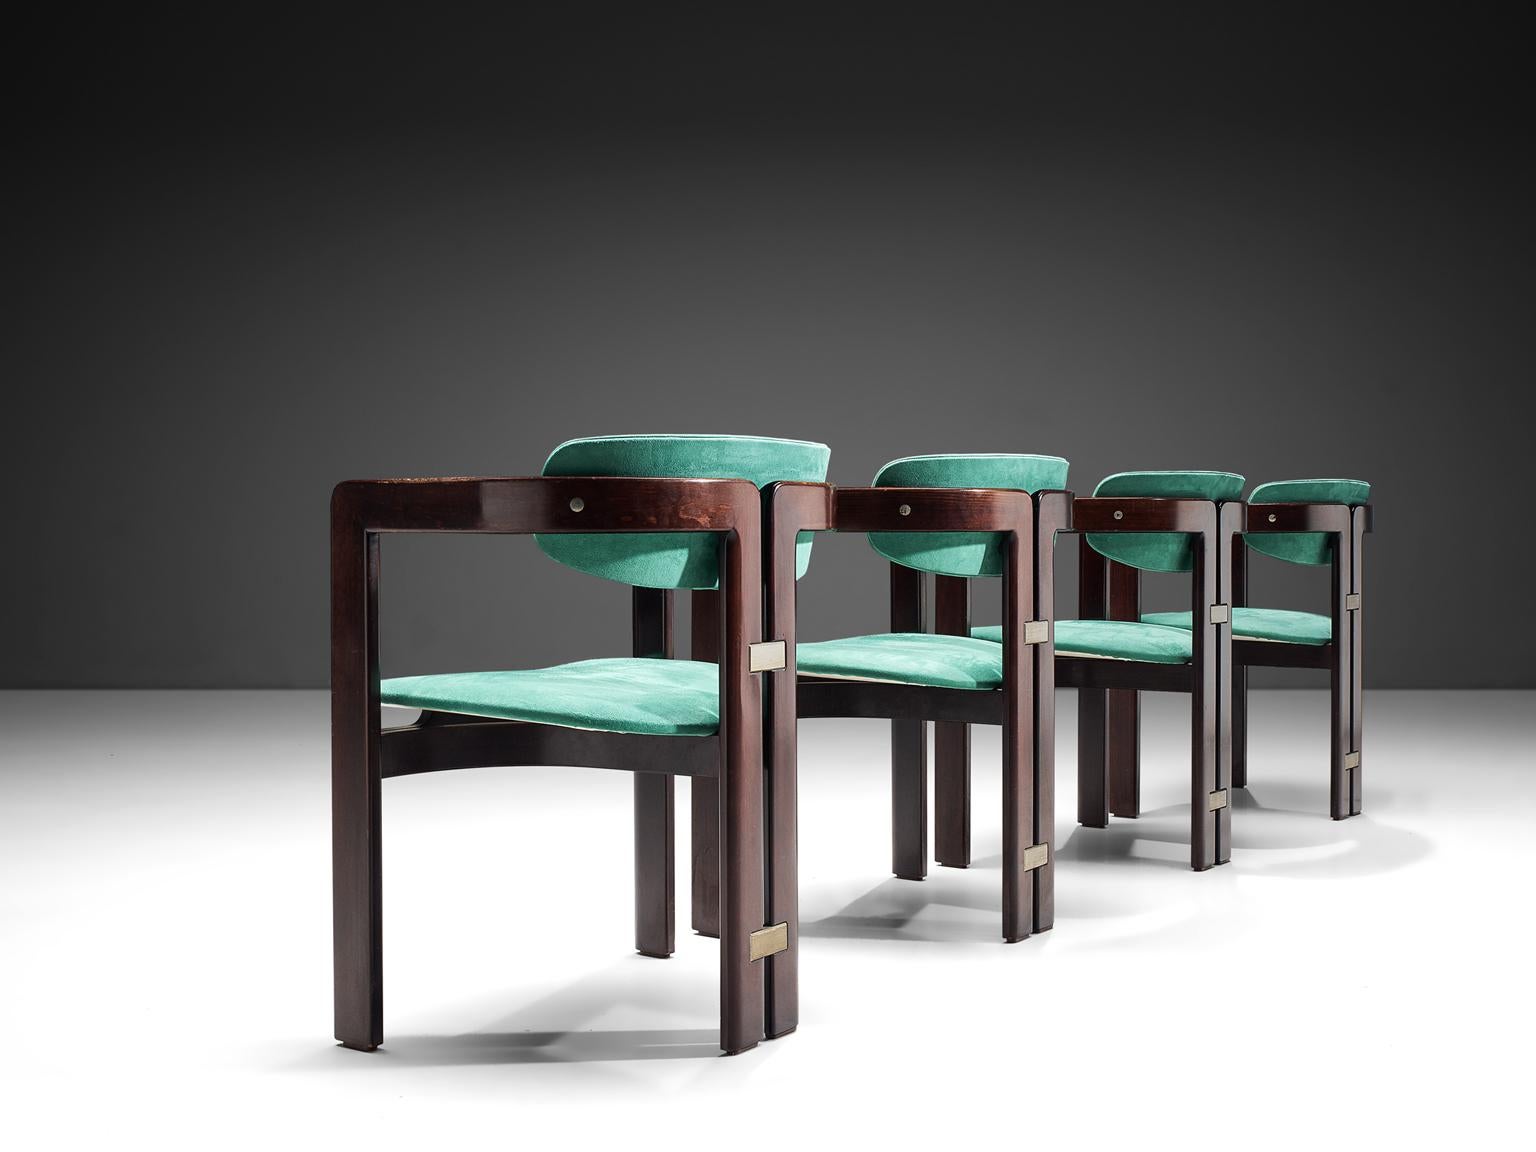 Augusto Savini, set of four 'Pamplona' dining room chairs, stained ashwood and turquoise fabric, by for Pozzi, Italy, 1965. 

Set of four armchairs in darkened and lacquered ash and green-blue suede inspired upholstery. A characteristic design;